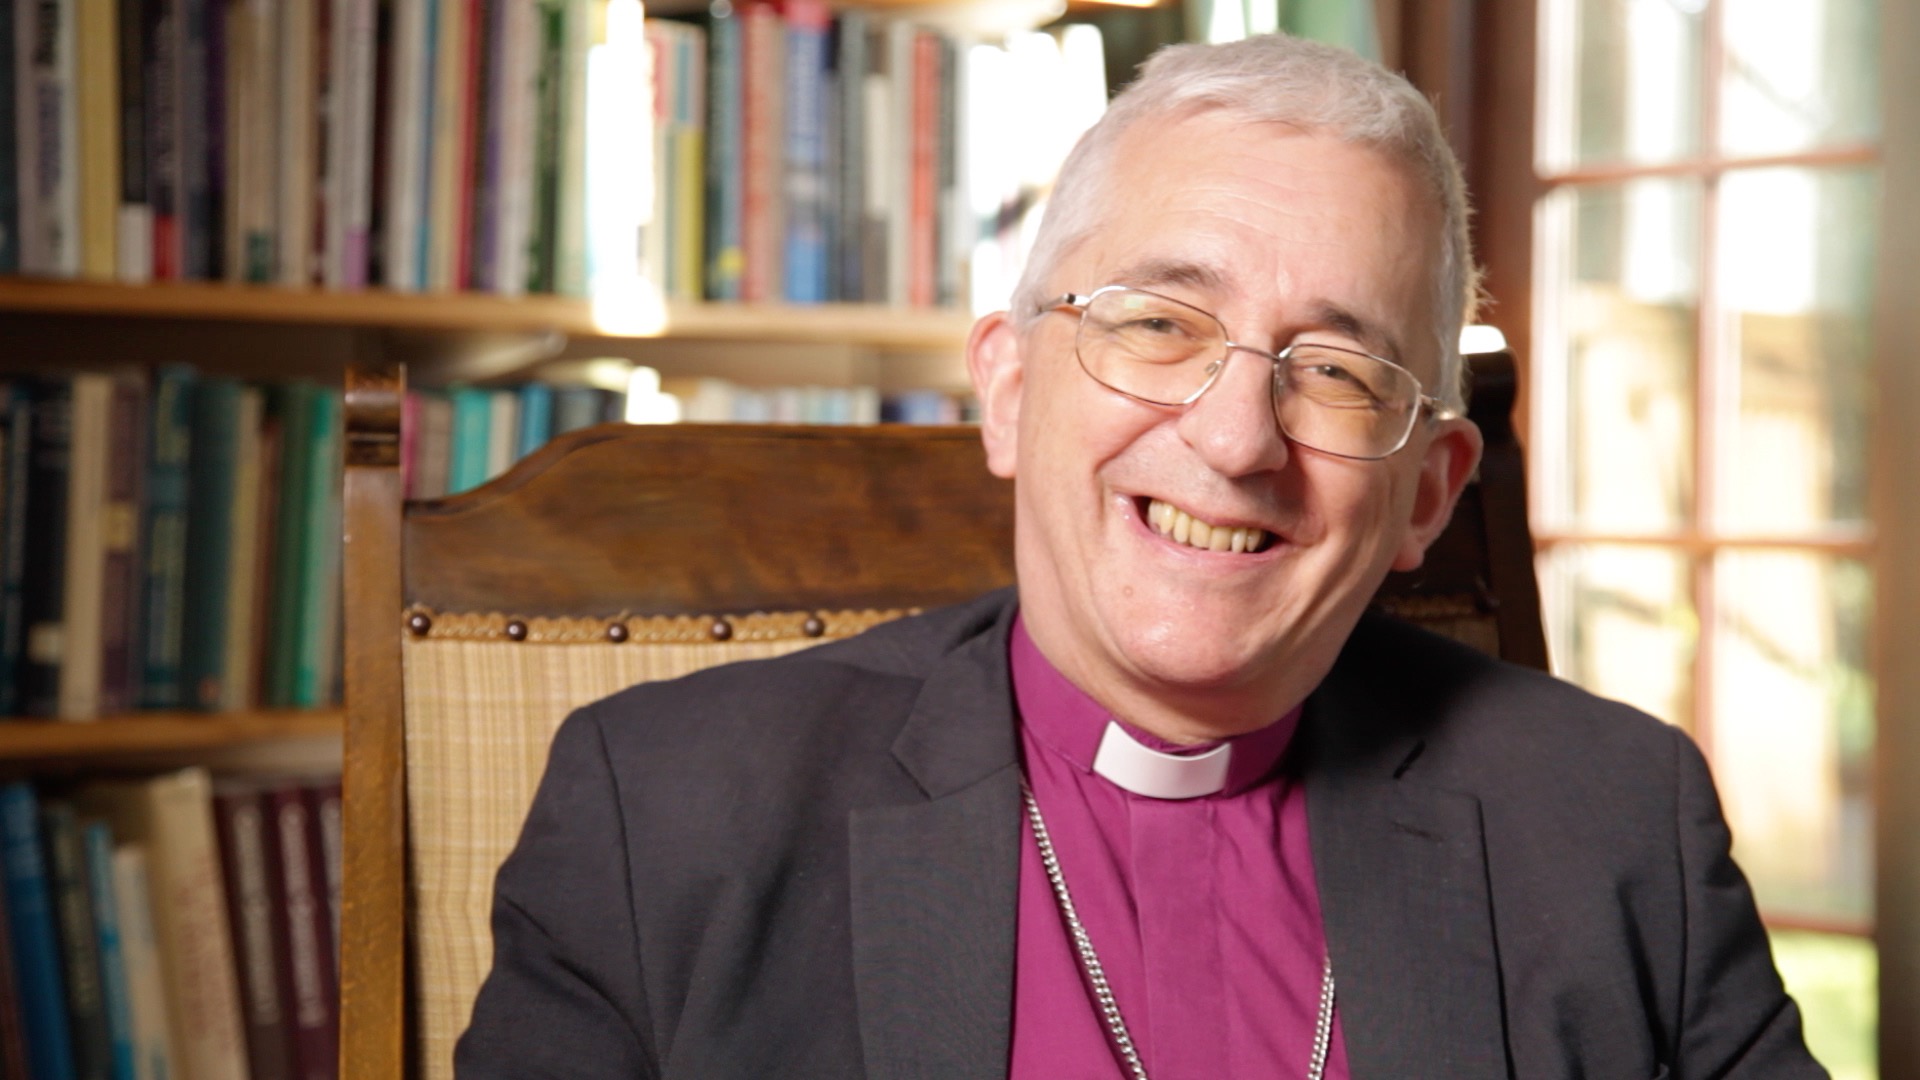 The Diocesan Bishop The Rt Revd Dr Michael Ipgrave OBE